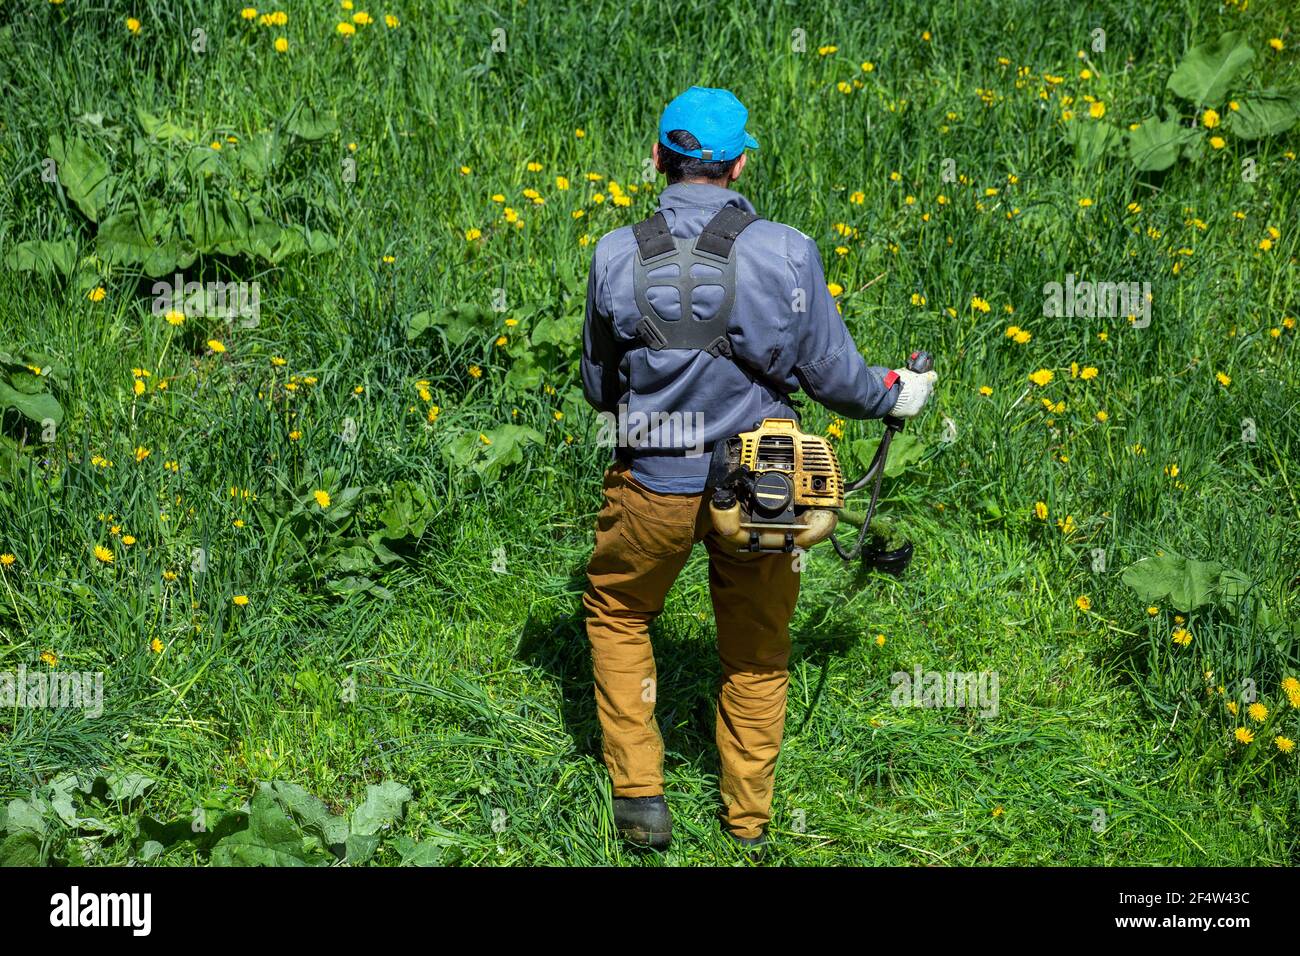 Lawnmower worker man cutting green grass at summer daylight with two-cycle engine string trimmer in Russia. Stock Photo